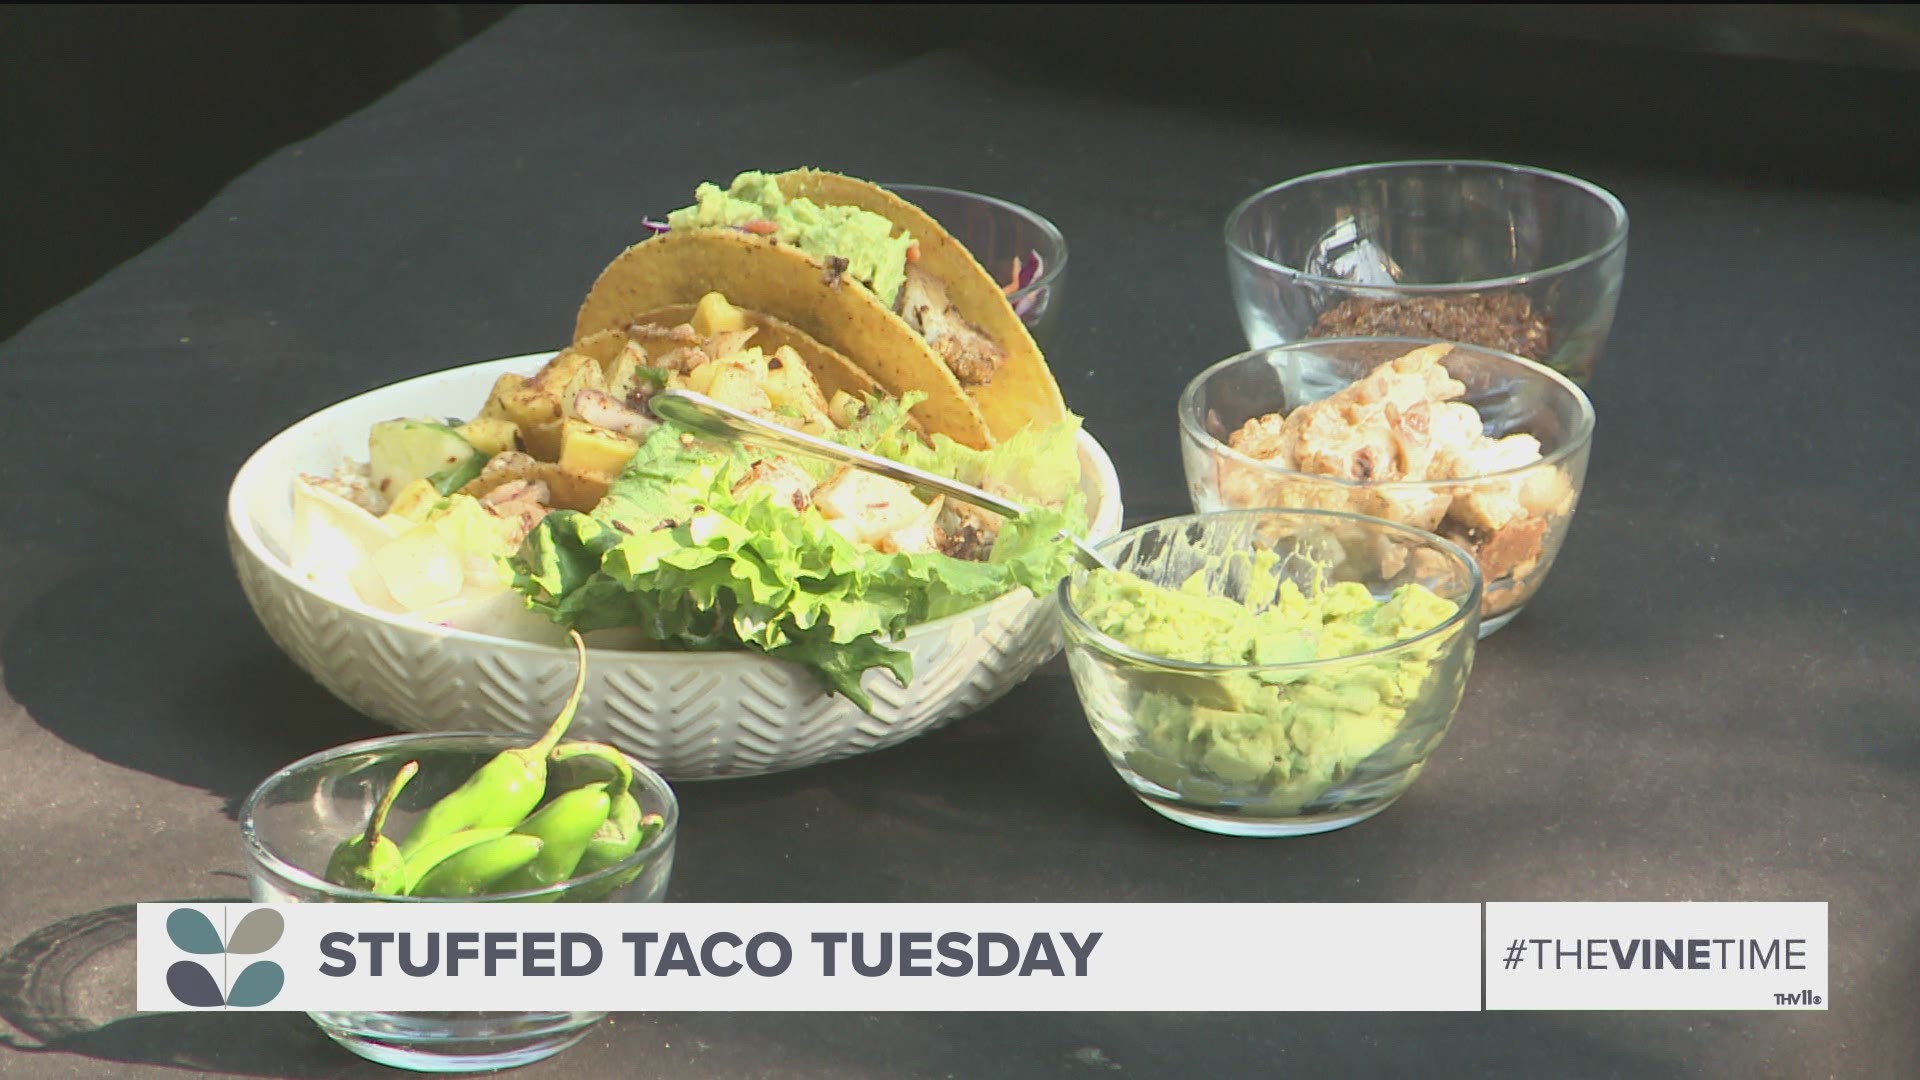 Dr. Tionna L. Jenkins with Plate It Healthy shares a recipe for plant-based Jerk tacos stuffed with cauliflower.